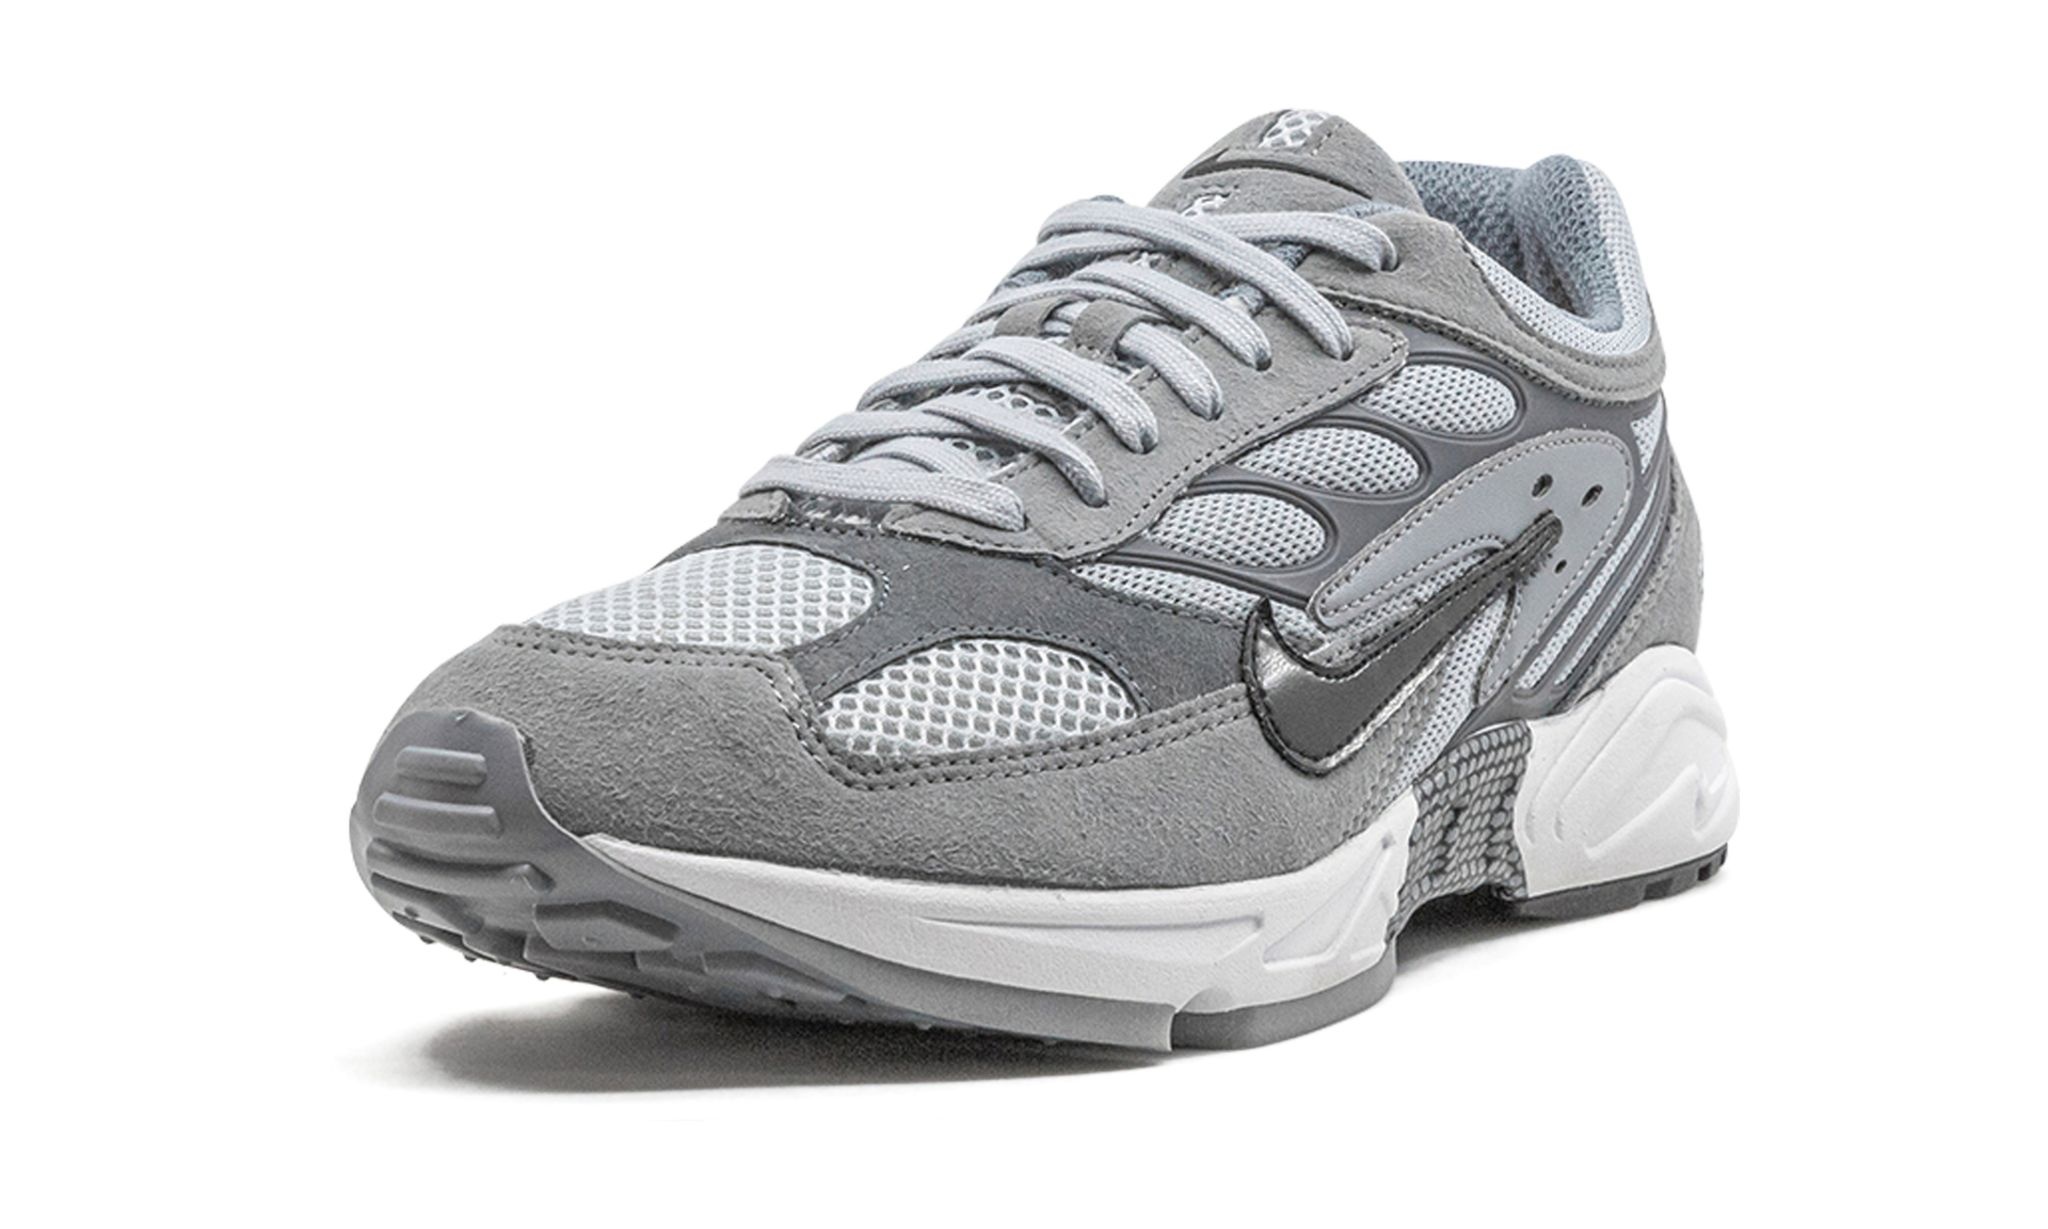 Ghost Racer "Cool Grey" - 4